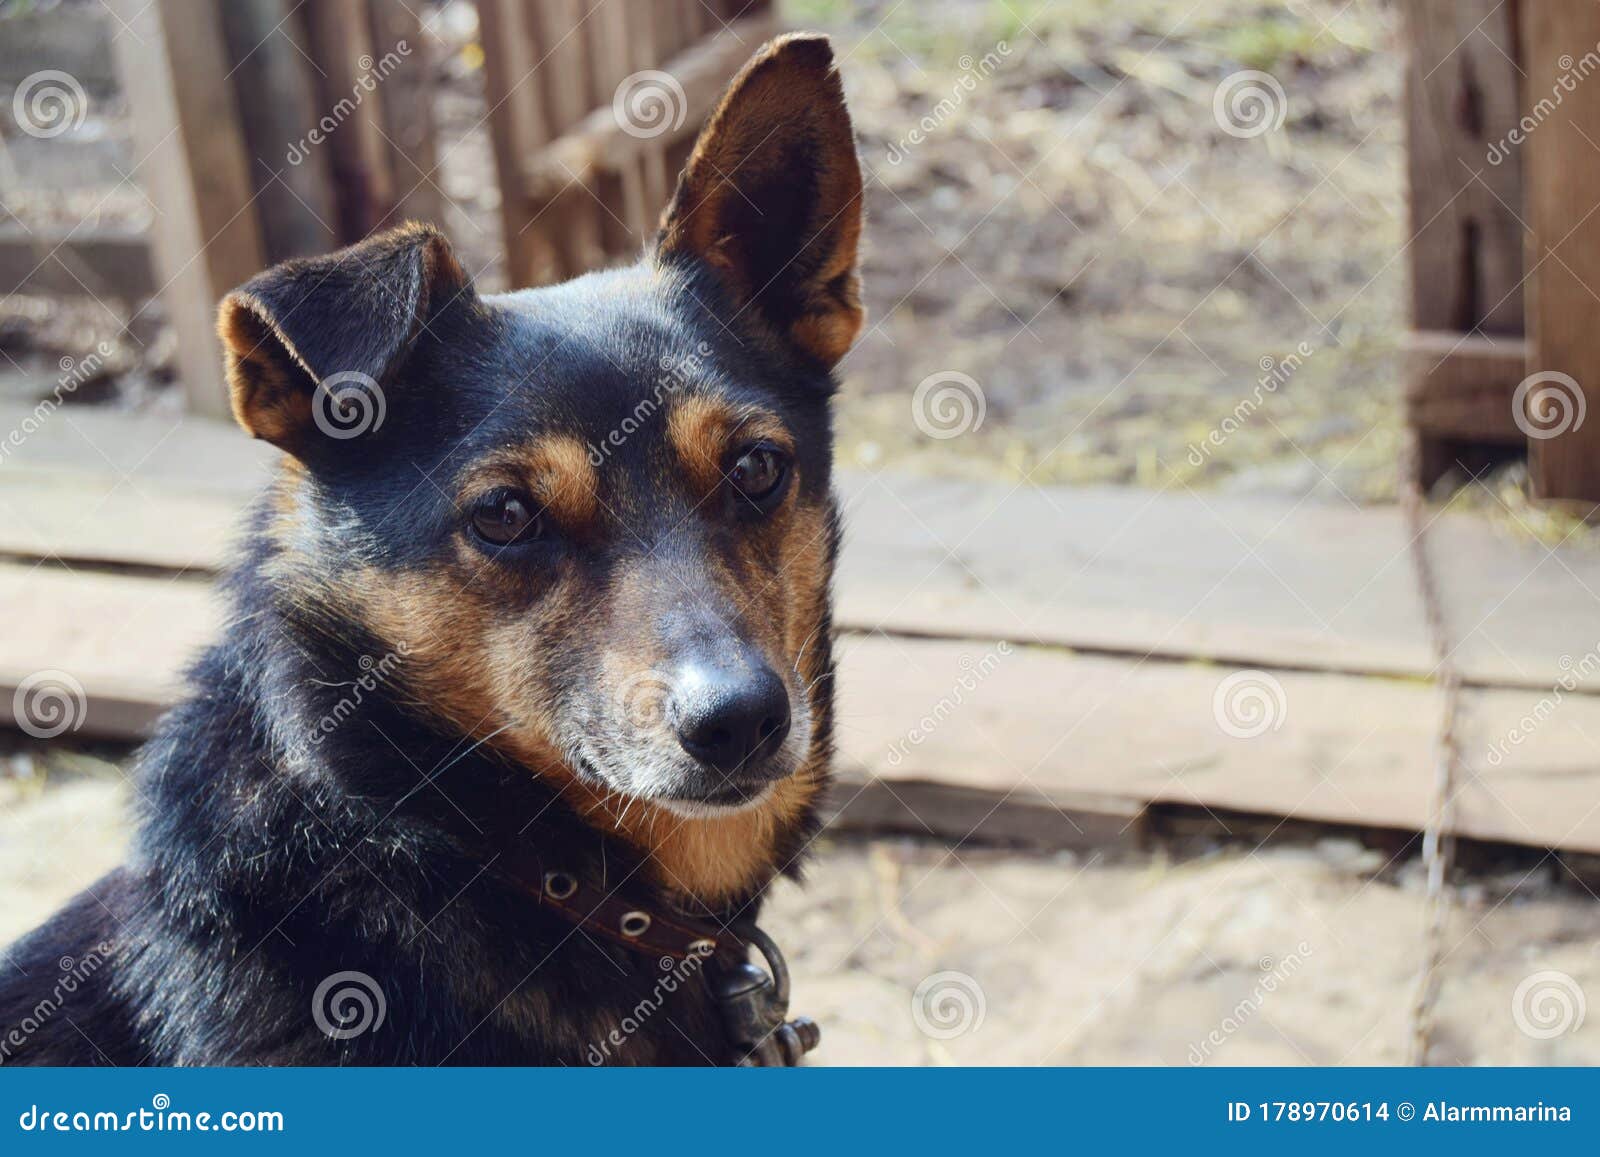 Small Dog Dachshund Color German Shepherd Close-up on a Chain with a Collar  in a Country House. Stock Photo - Image of friend, horizontal: 178970614